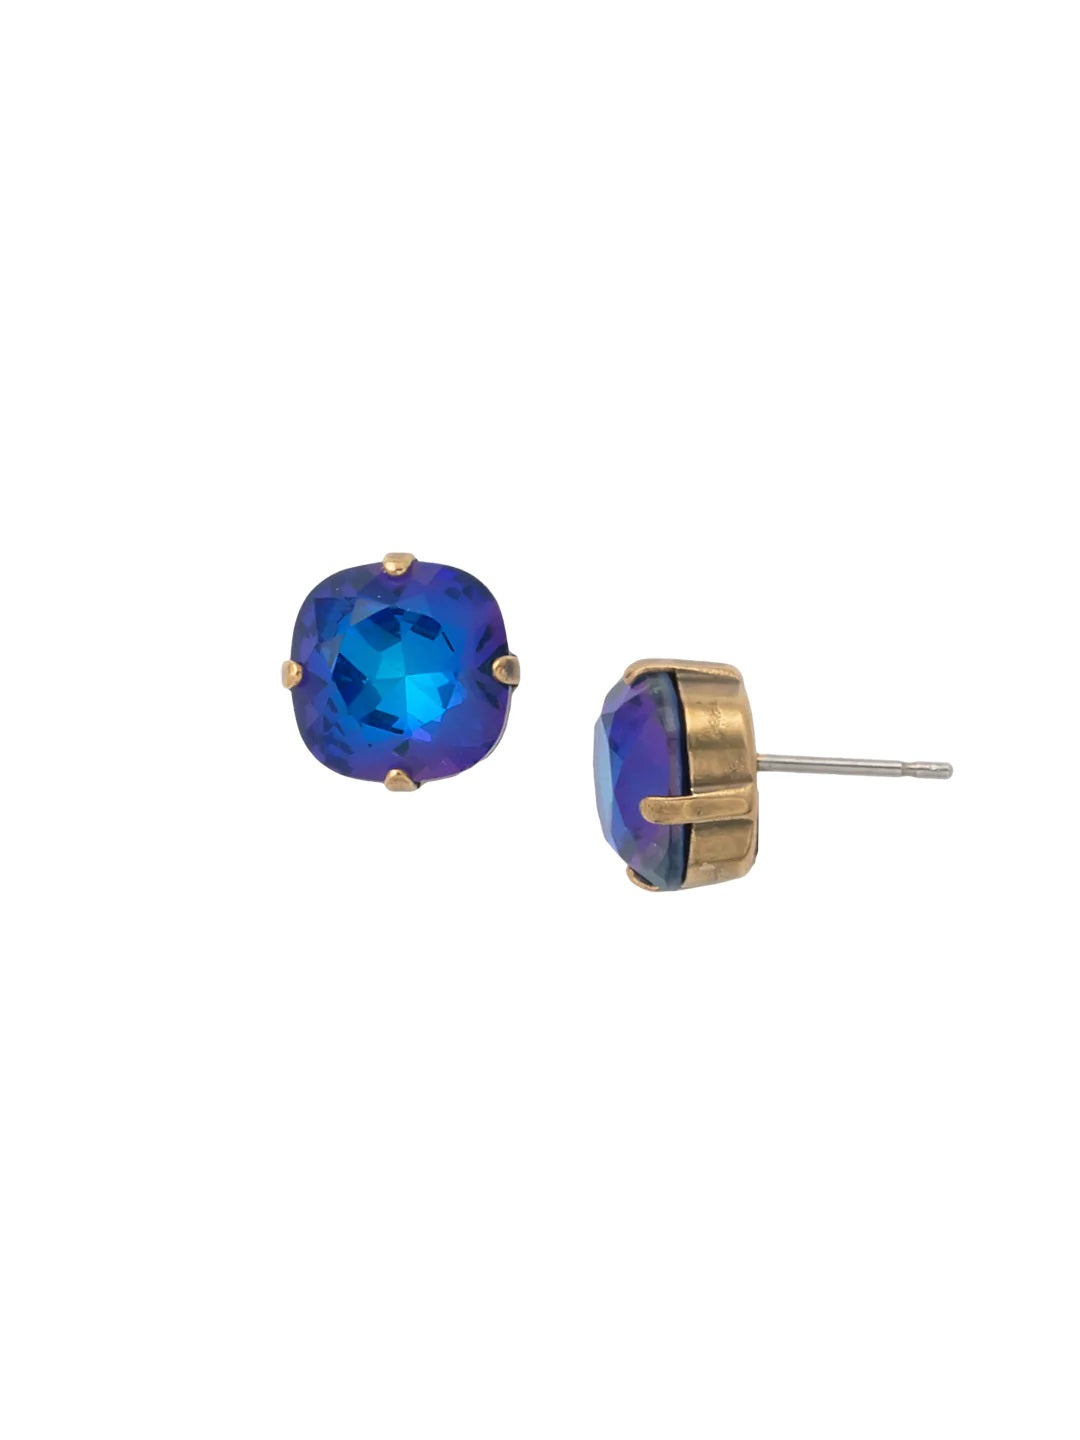 Halcyon Stud Earrings (Antique Gold Finish)